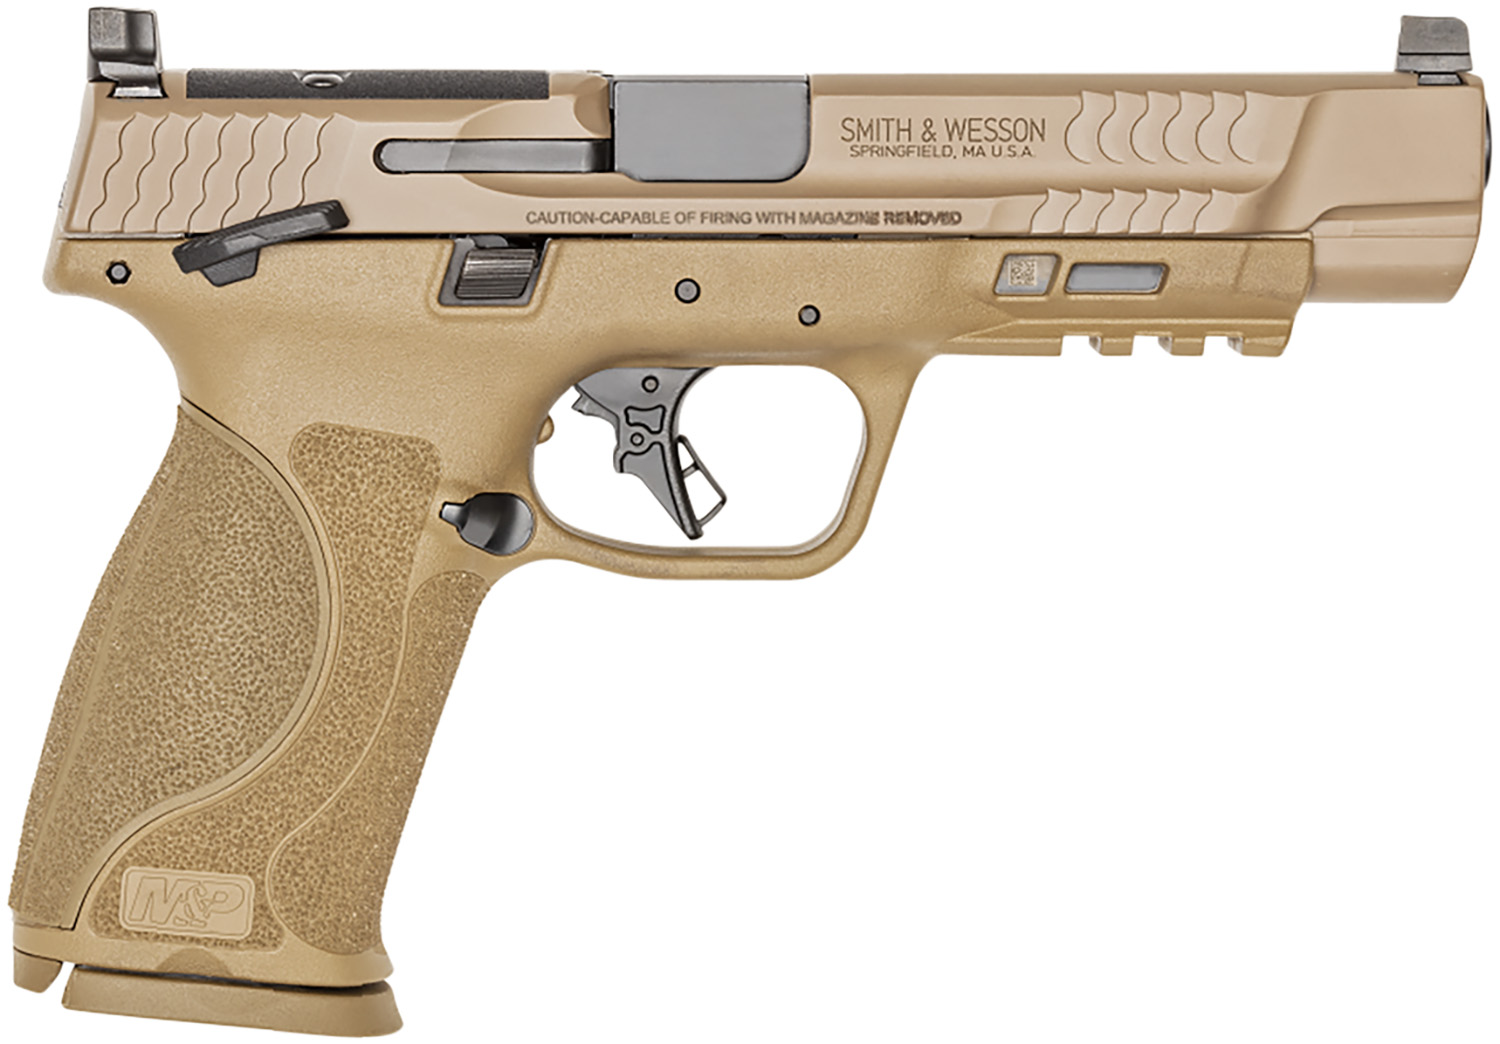 S&amp;W M&amp;P9         13569 9M M2 THSFTY OR 5 FDE   17R